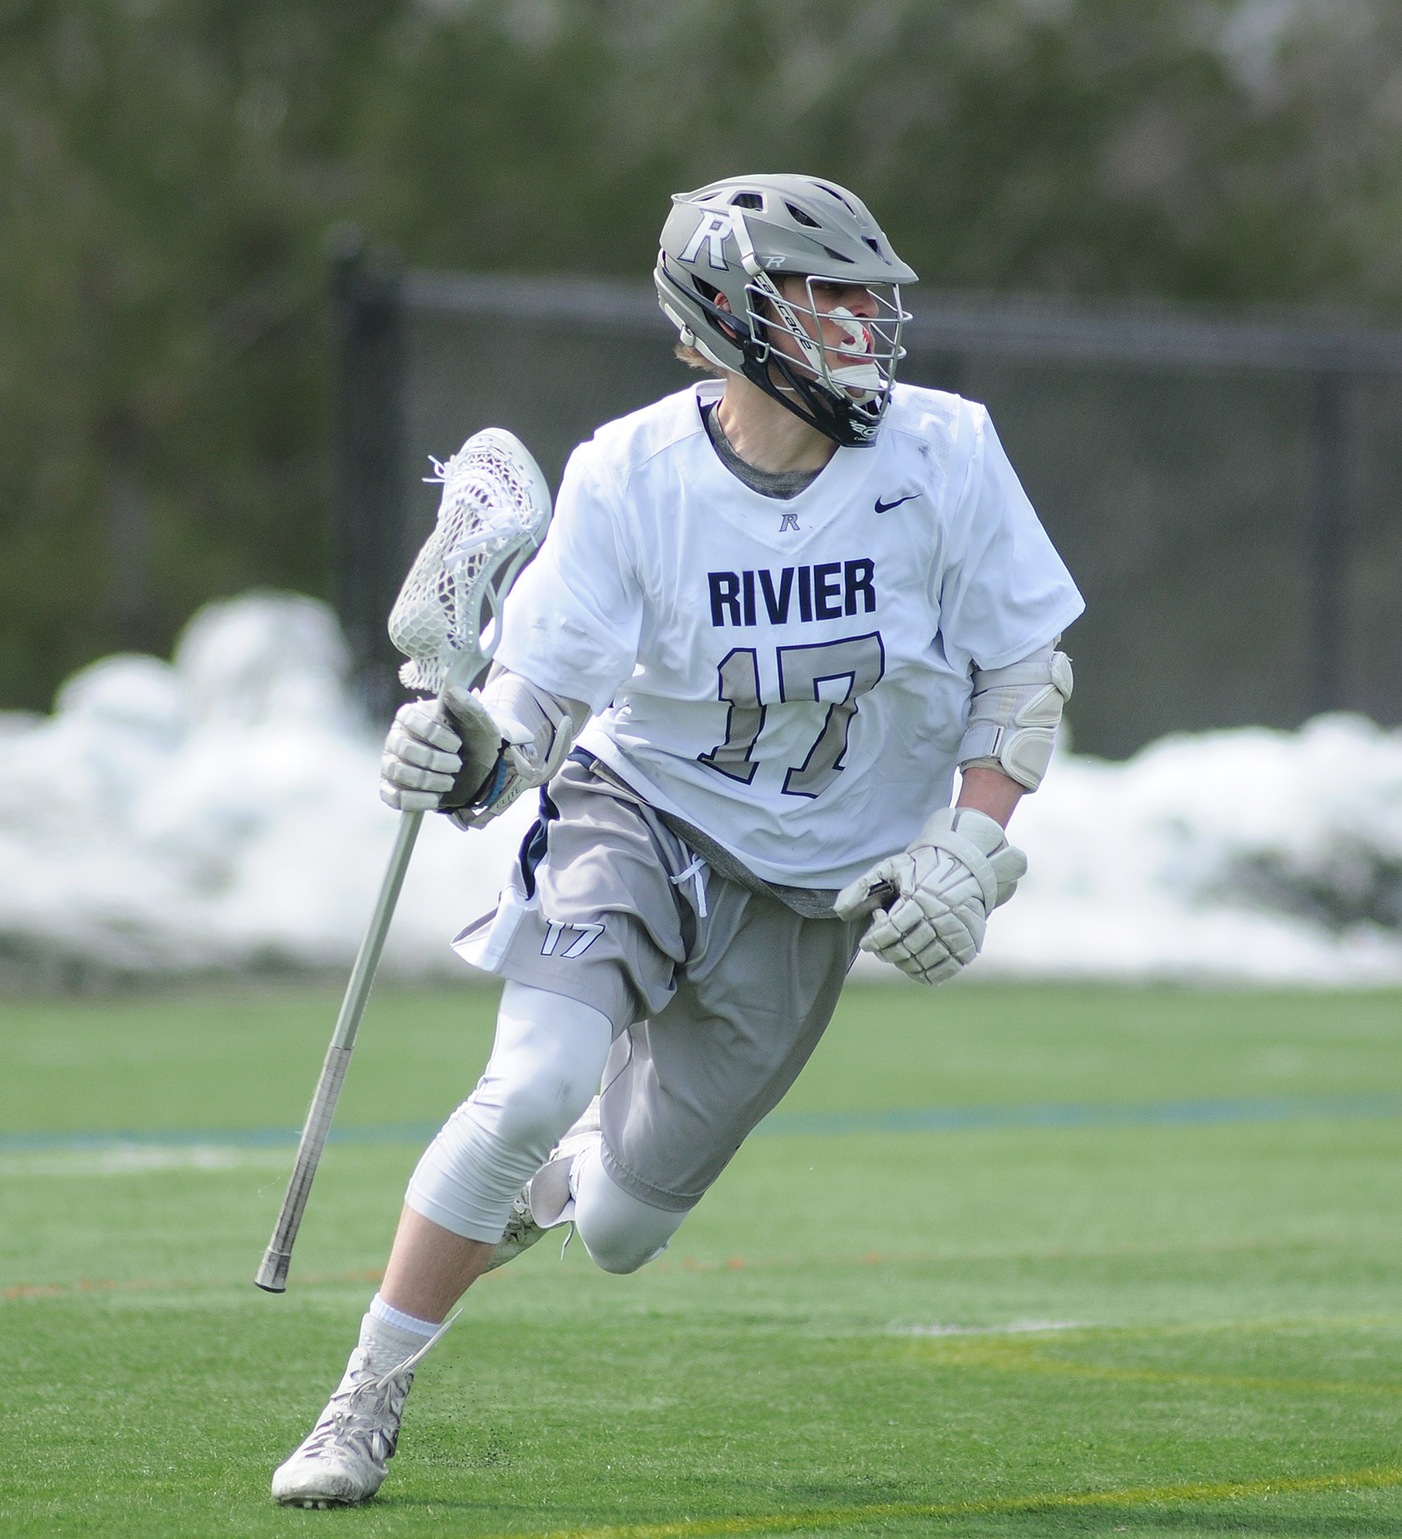 Men's Lacrosse: Raiders suffer first loss of the season to Monks, 13-7.